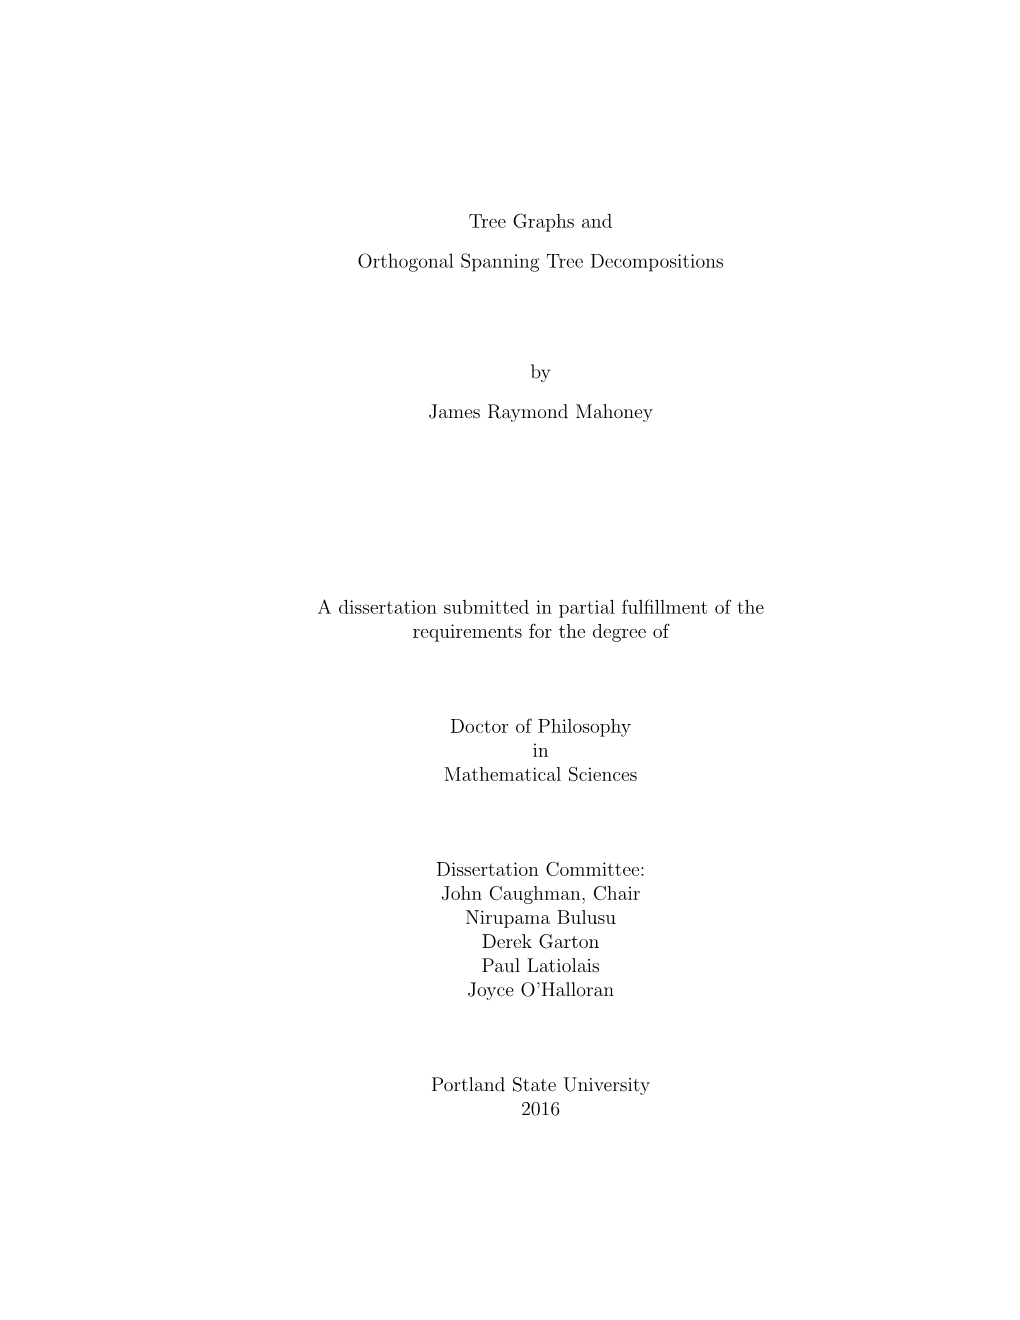 Tree Graphs and Orthogonal Spanning Tree Decompositions by James Raymond Mahoney a Dissertation Submitted in Partial Fulfillment